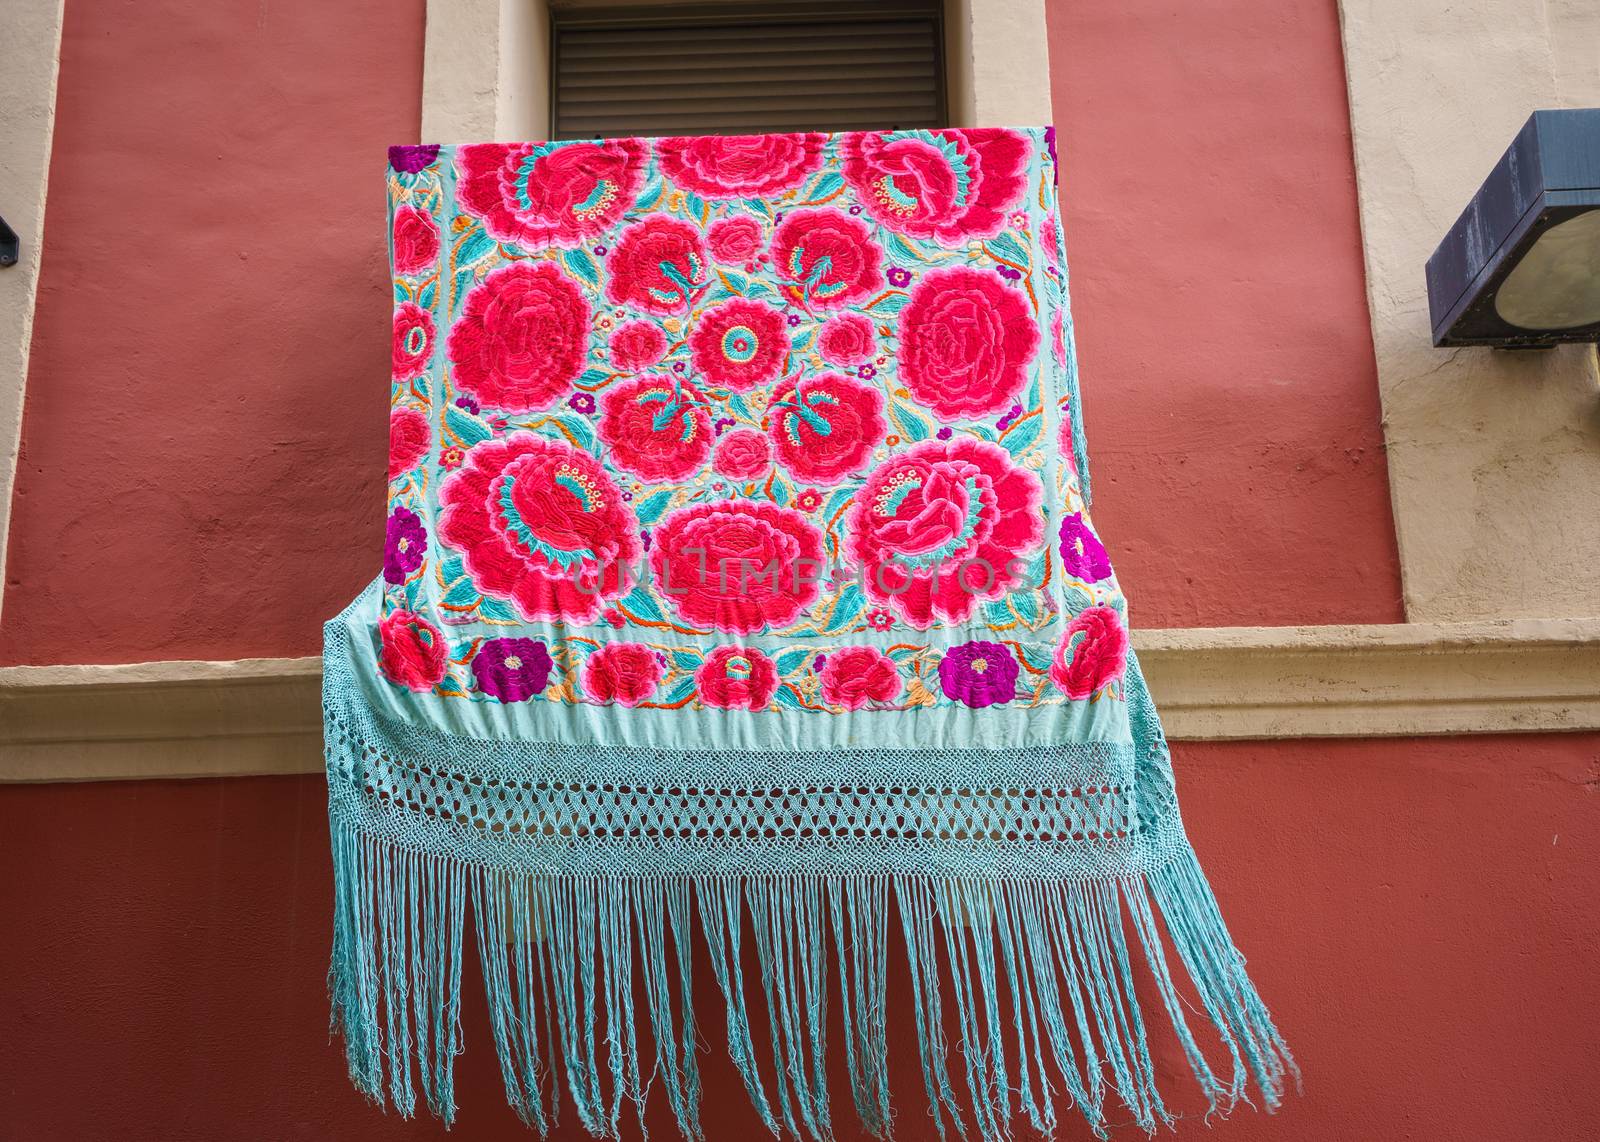 Balcony decorated with Manila shawl during the festivities of the Holy Week by tanaonte